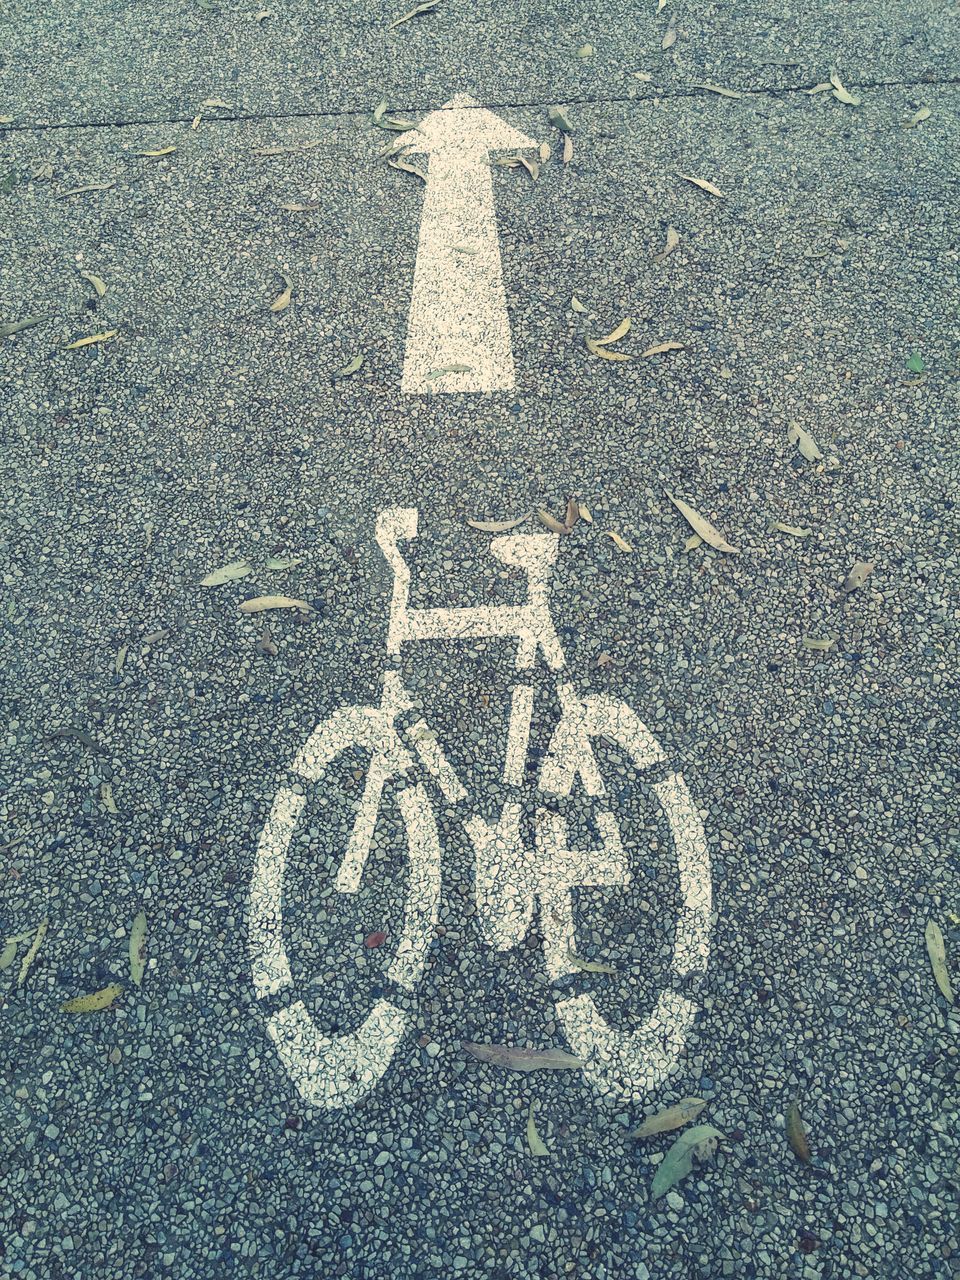 HIGH ANGLE VIEW OF BICYCLE ON ROAD